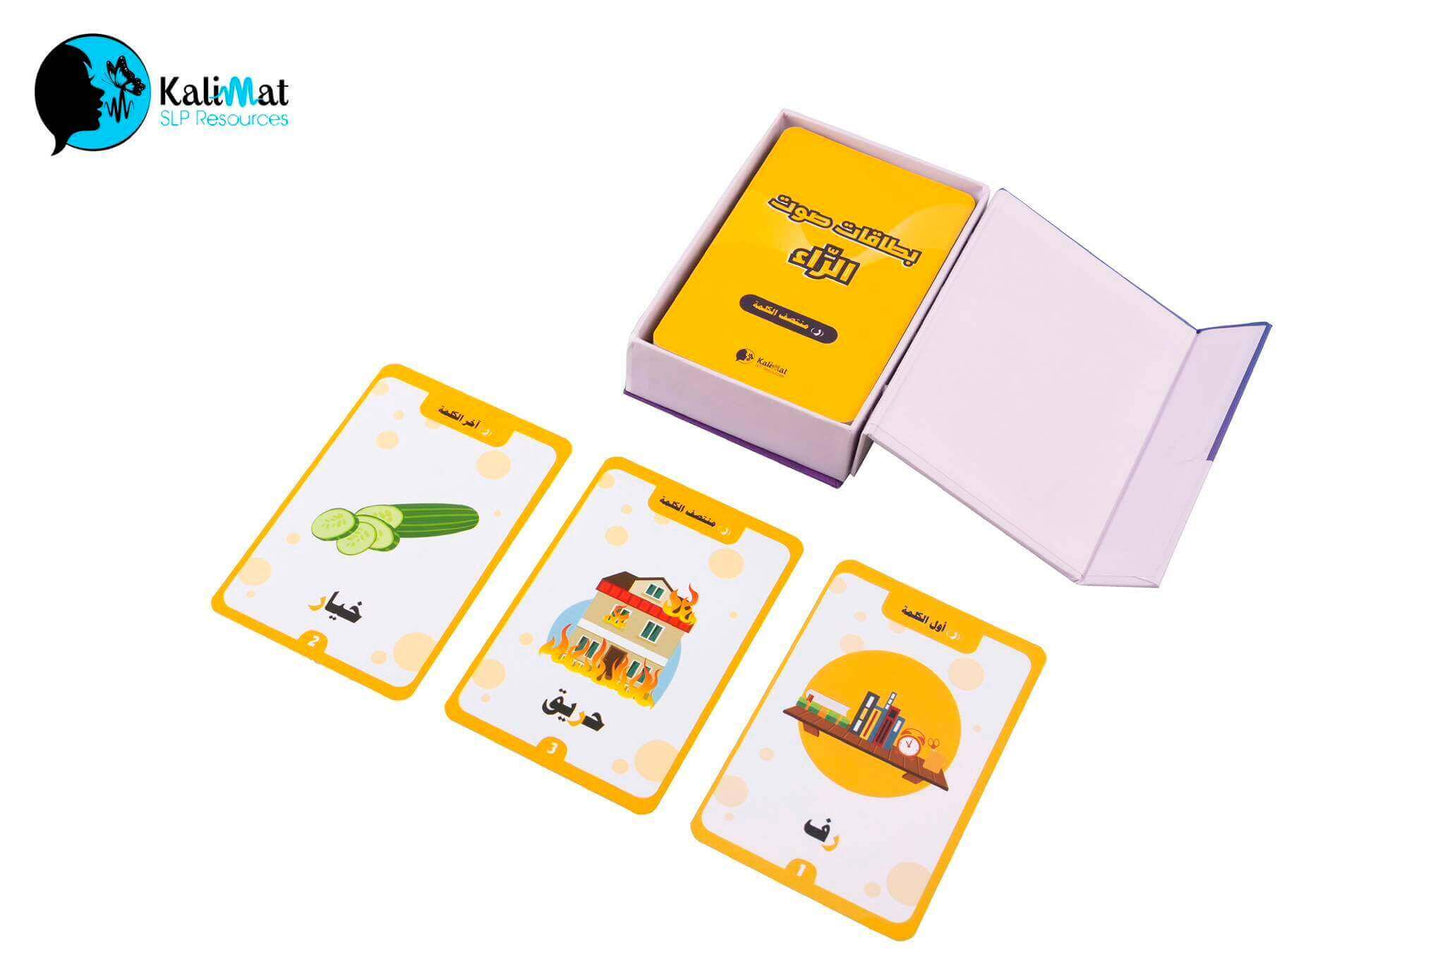 The flashcard game - the R Sound therapy cards.